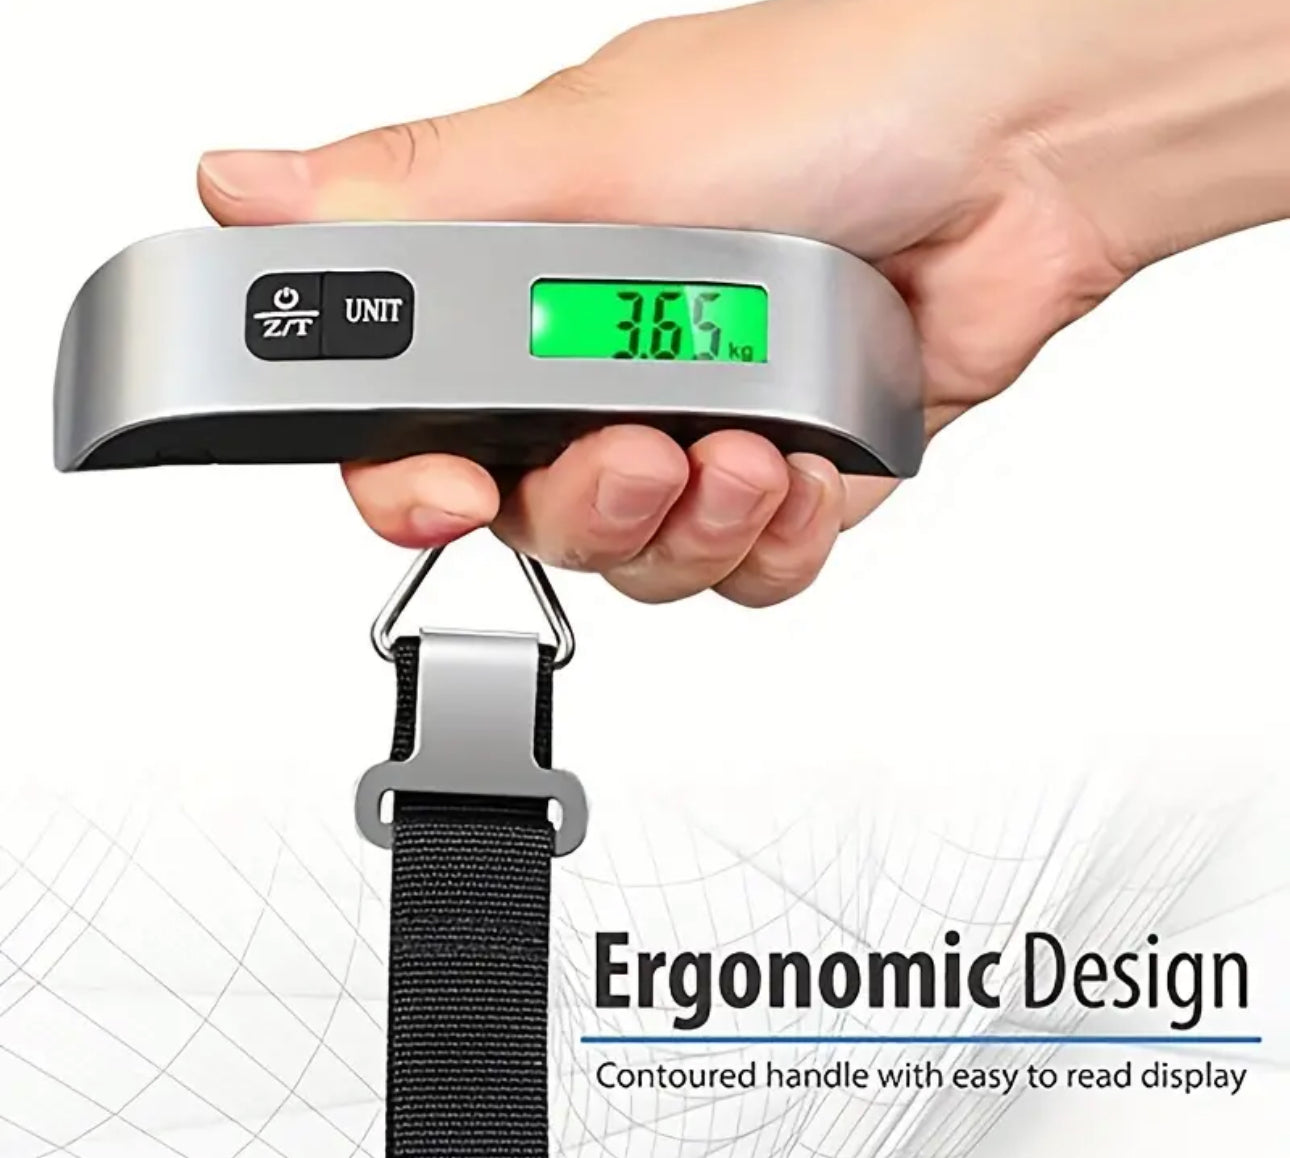 Pack and Go Digital Luggage Scale